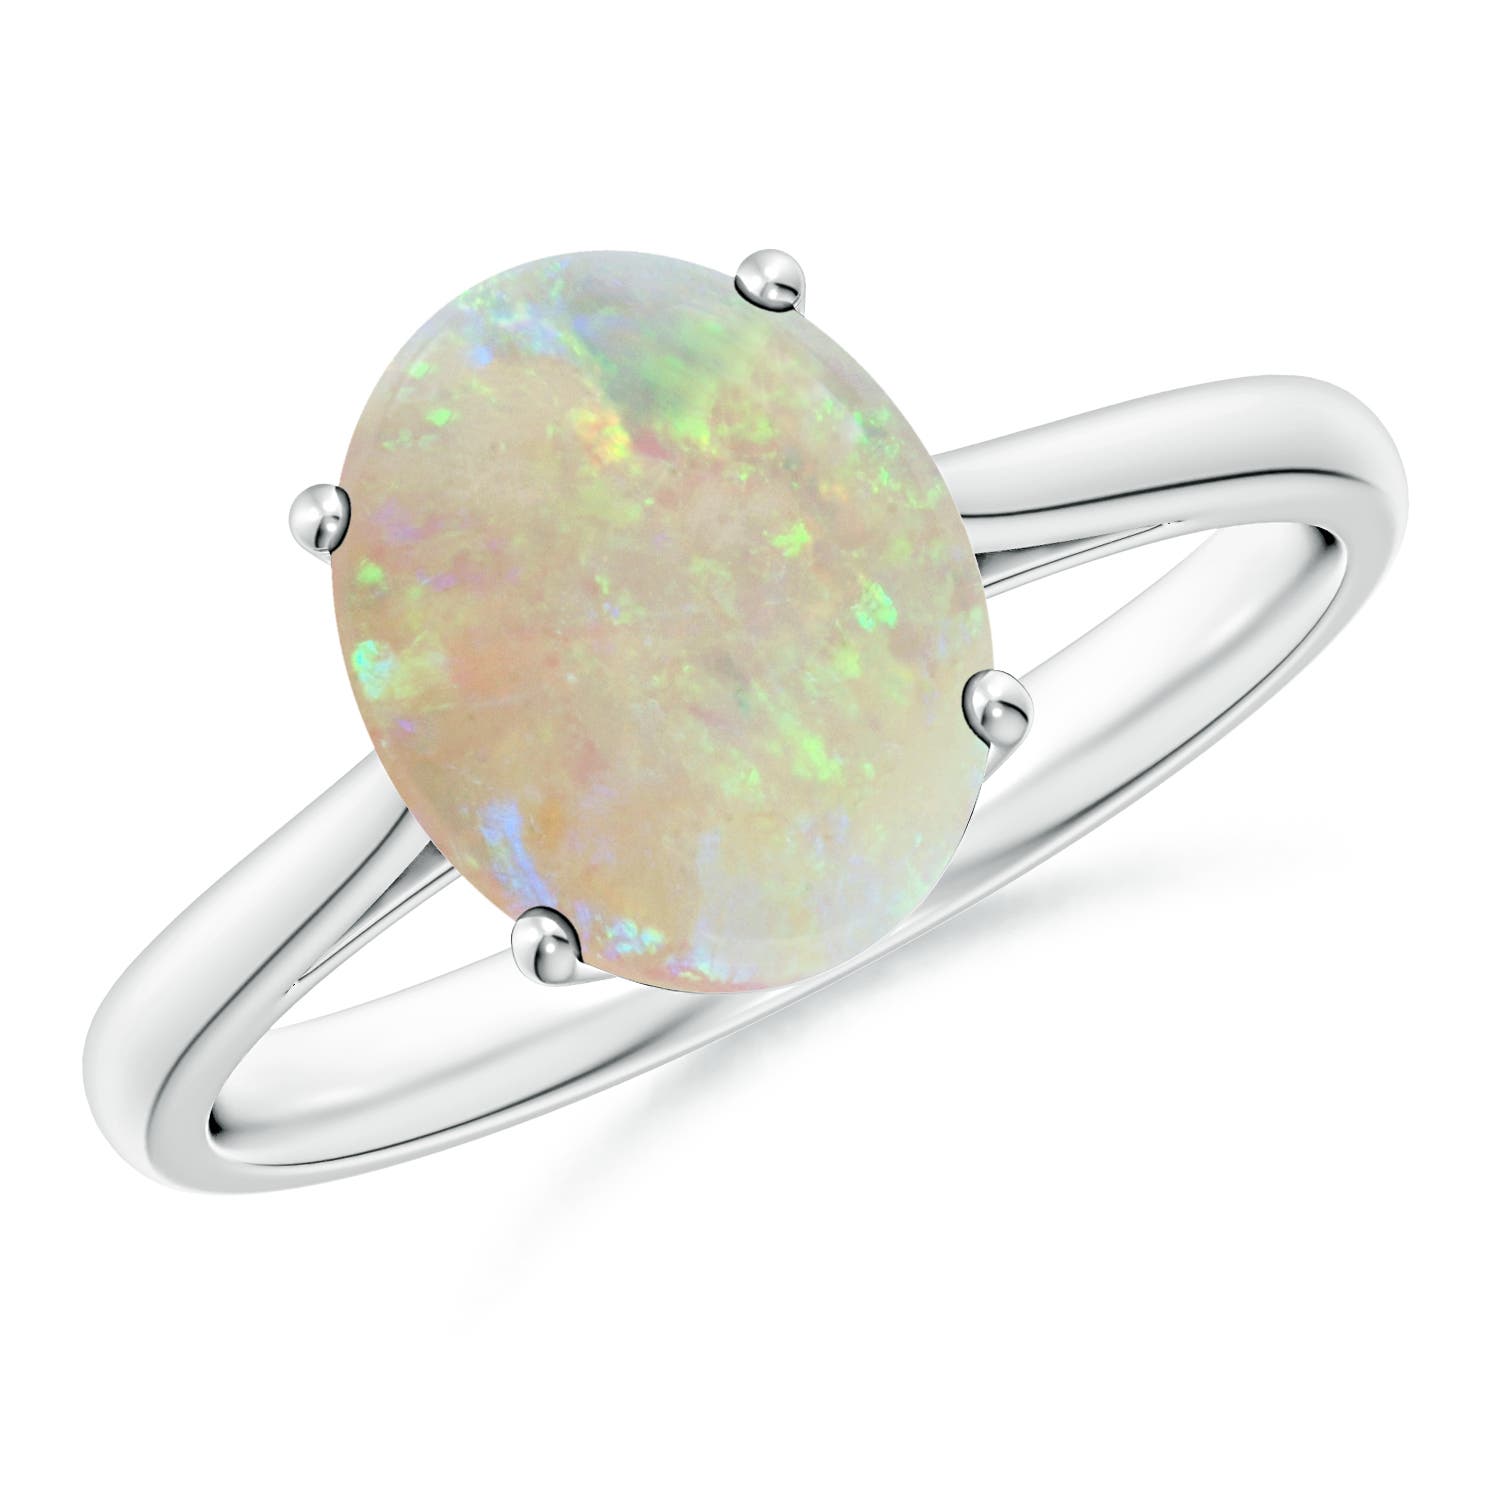 AAA - Opal / 1.45 CT / 14 KT White Gold